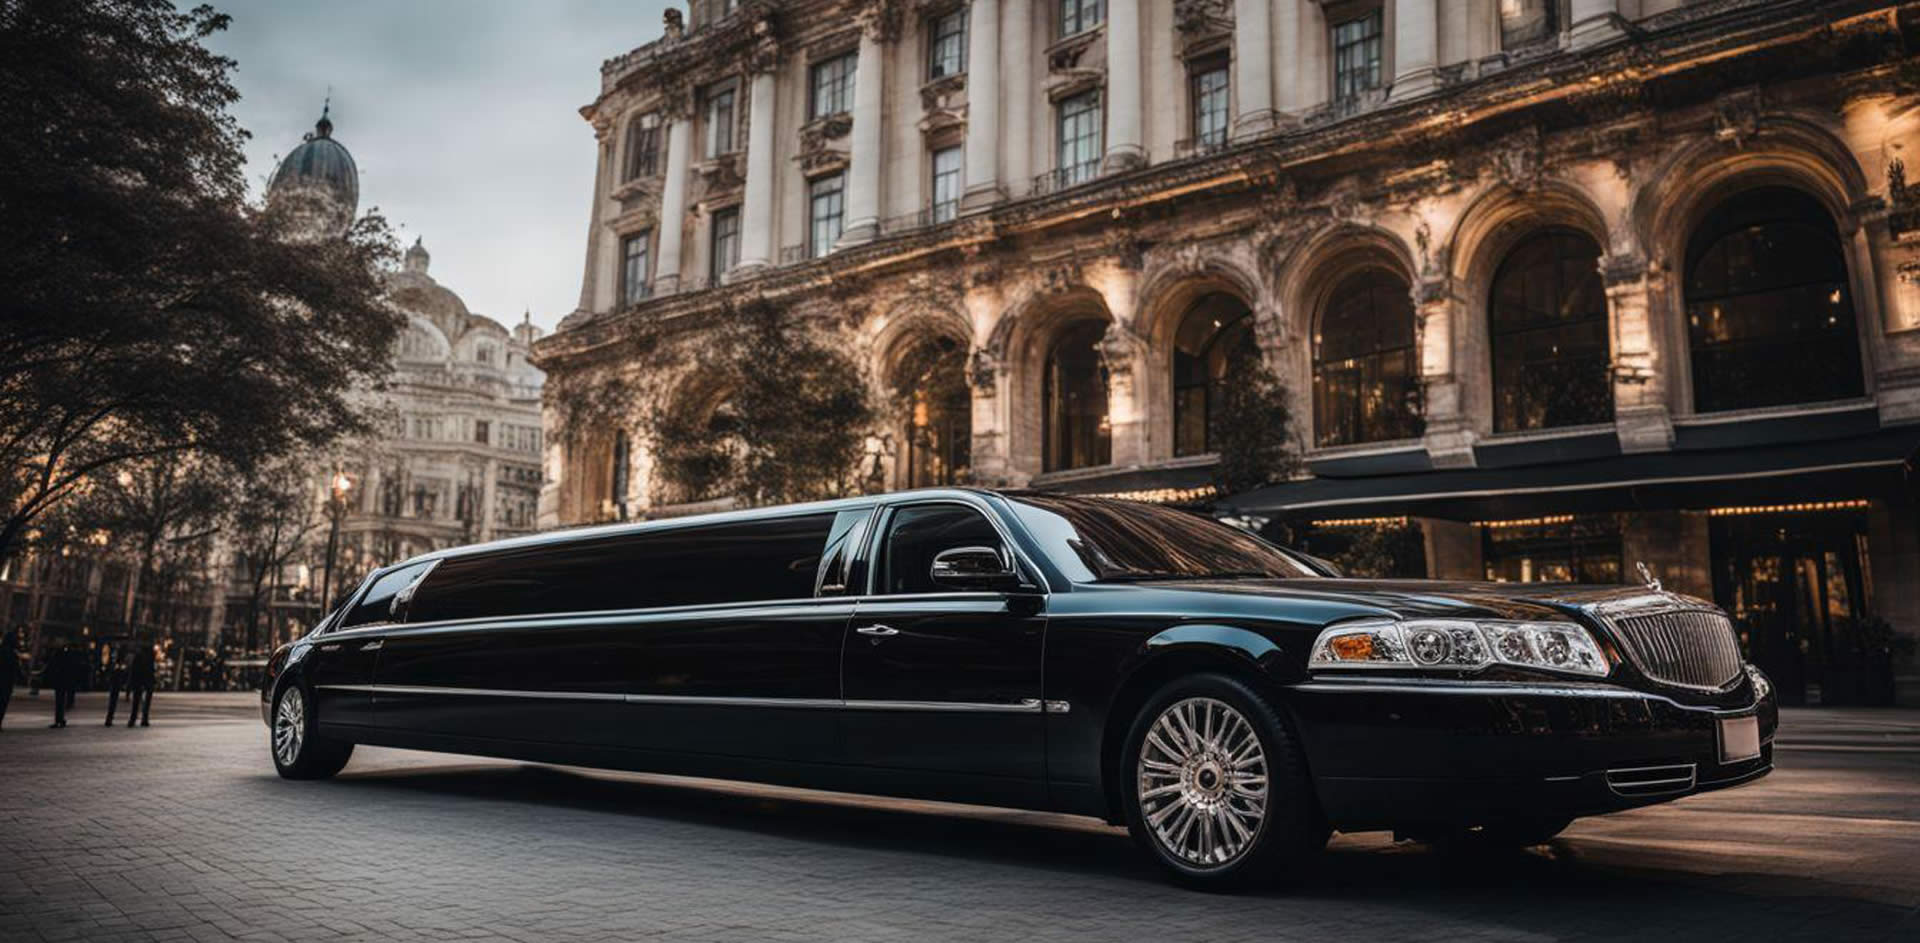 A black limousine parked on the side of a road